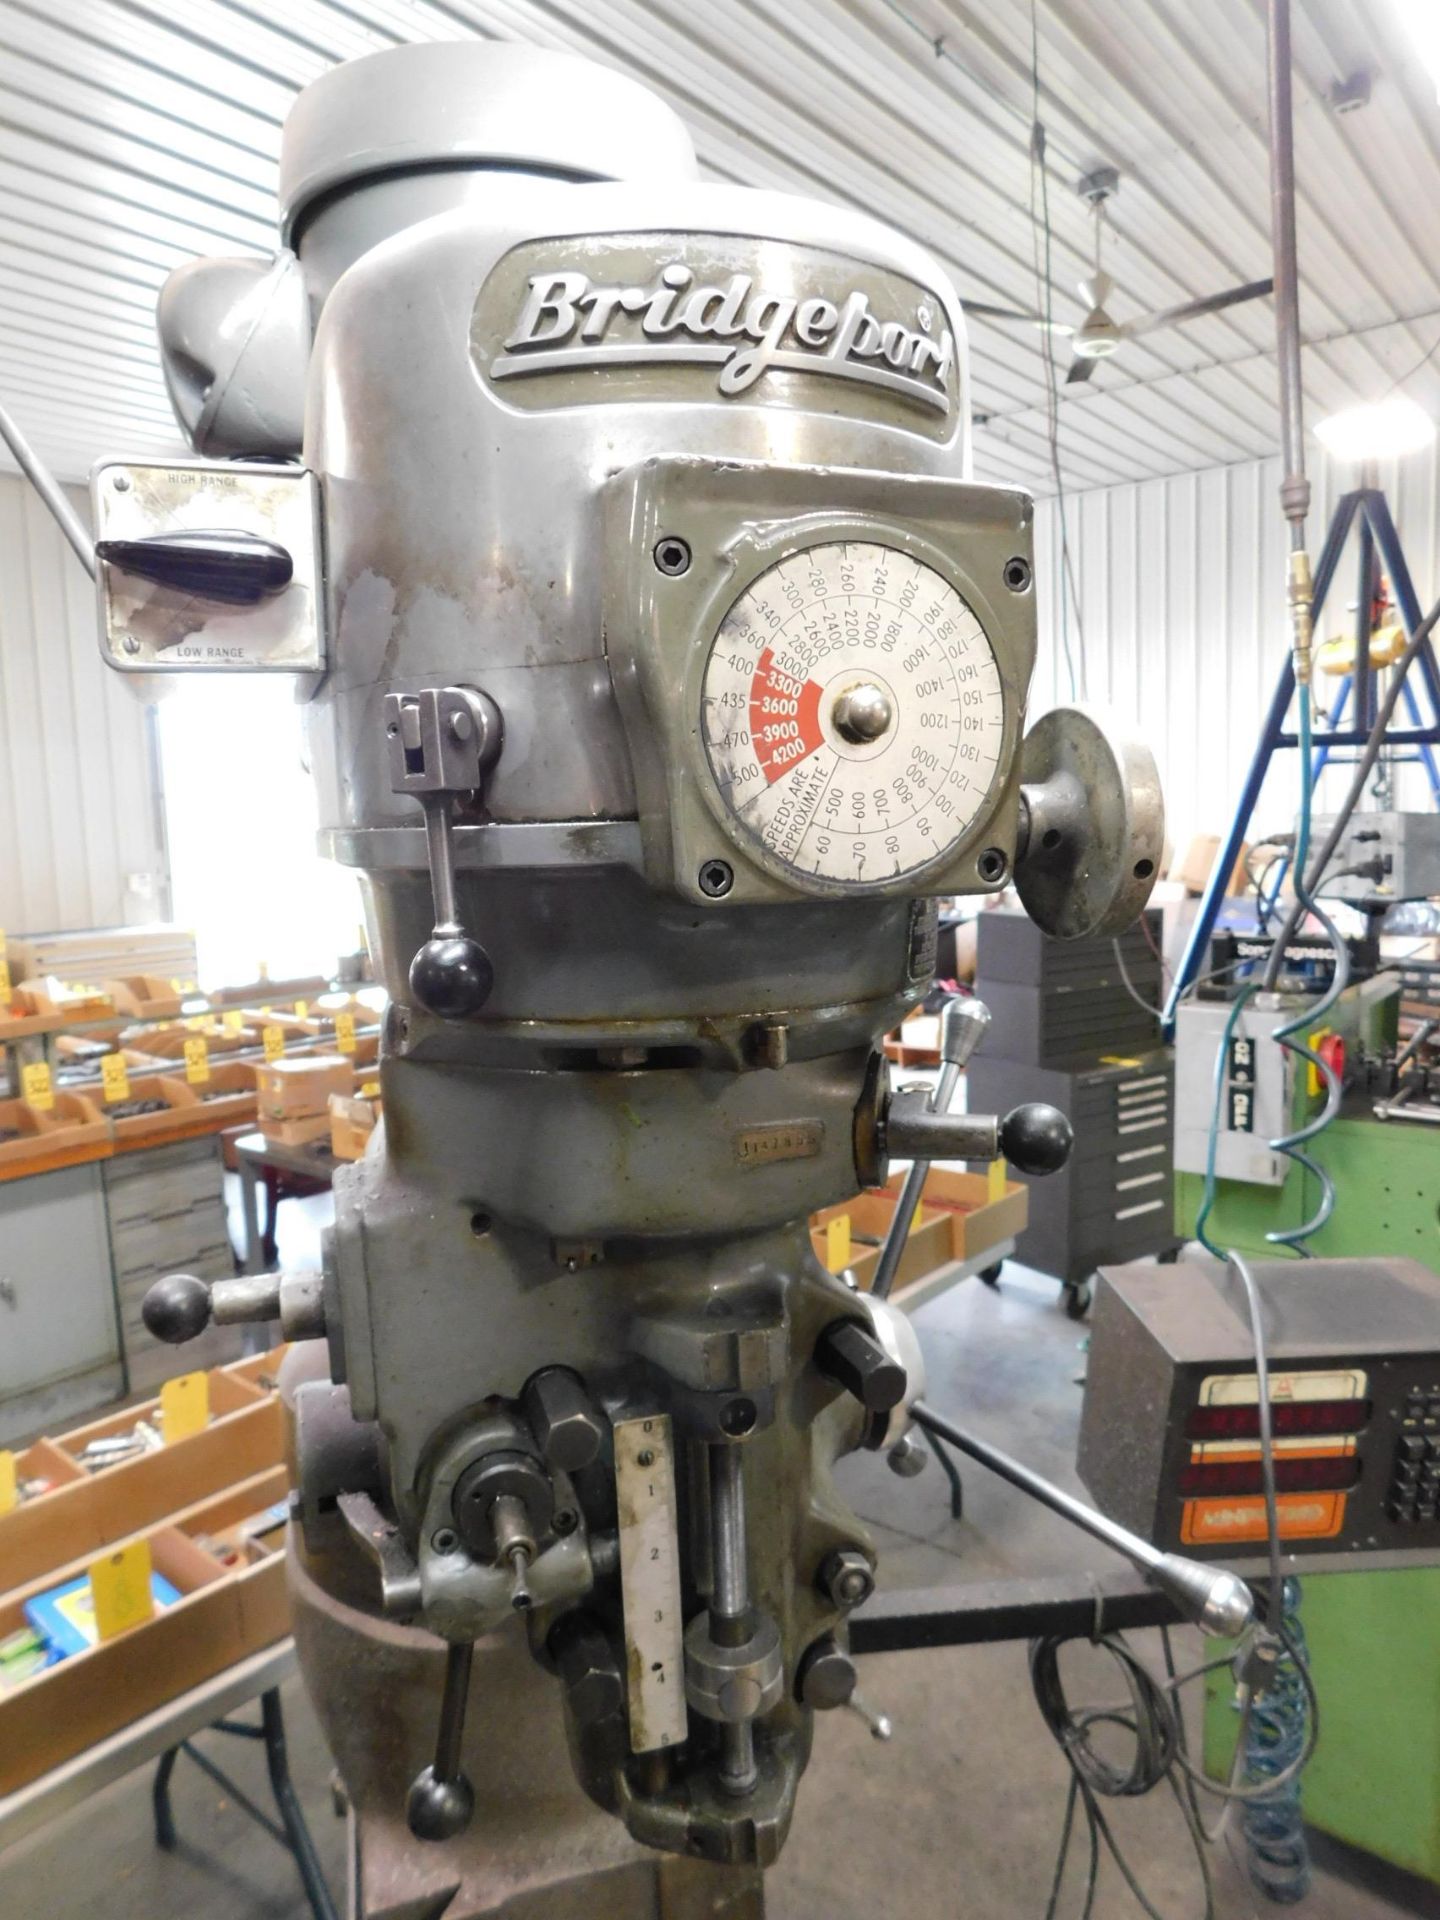 Bridgeport 1 1/2 H.P. Variable Speed Vertical Mill sn#12BR143491,9"X42" Table, 4"Riser Block, Amilam - Image 6 of 10